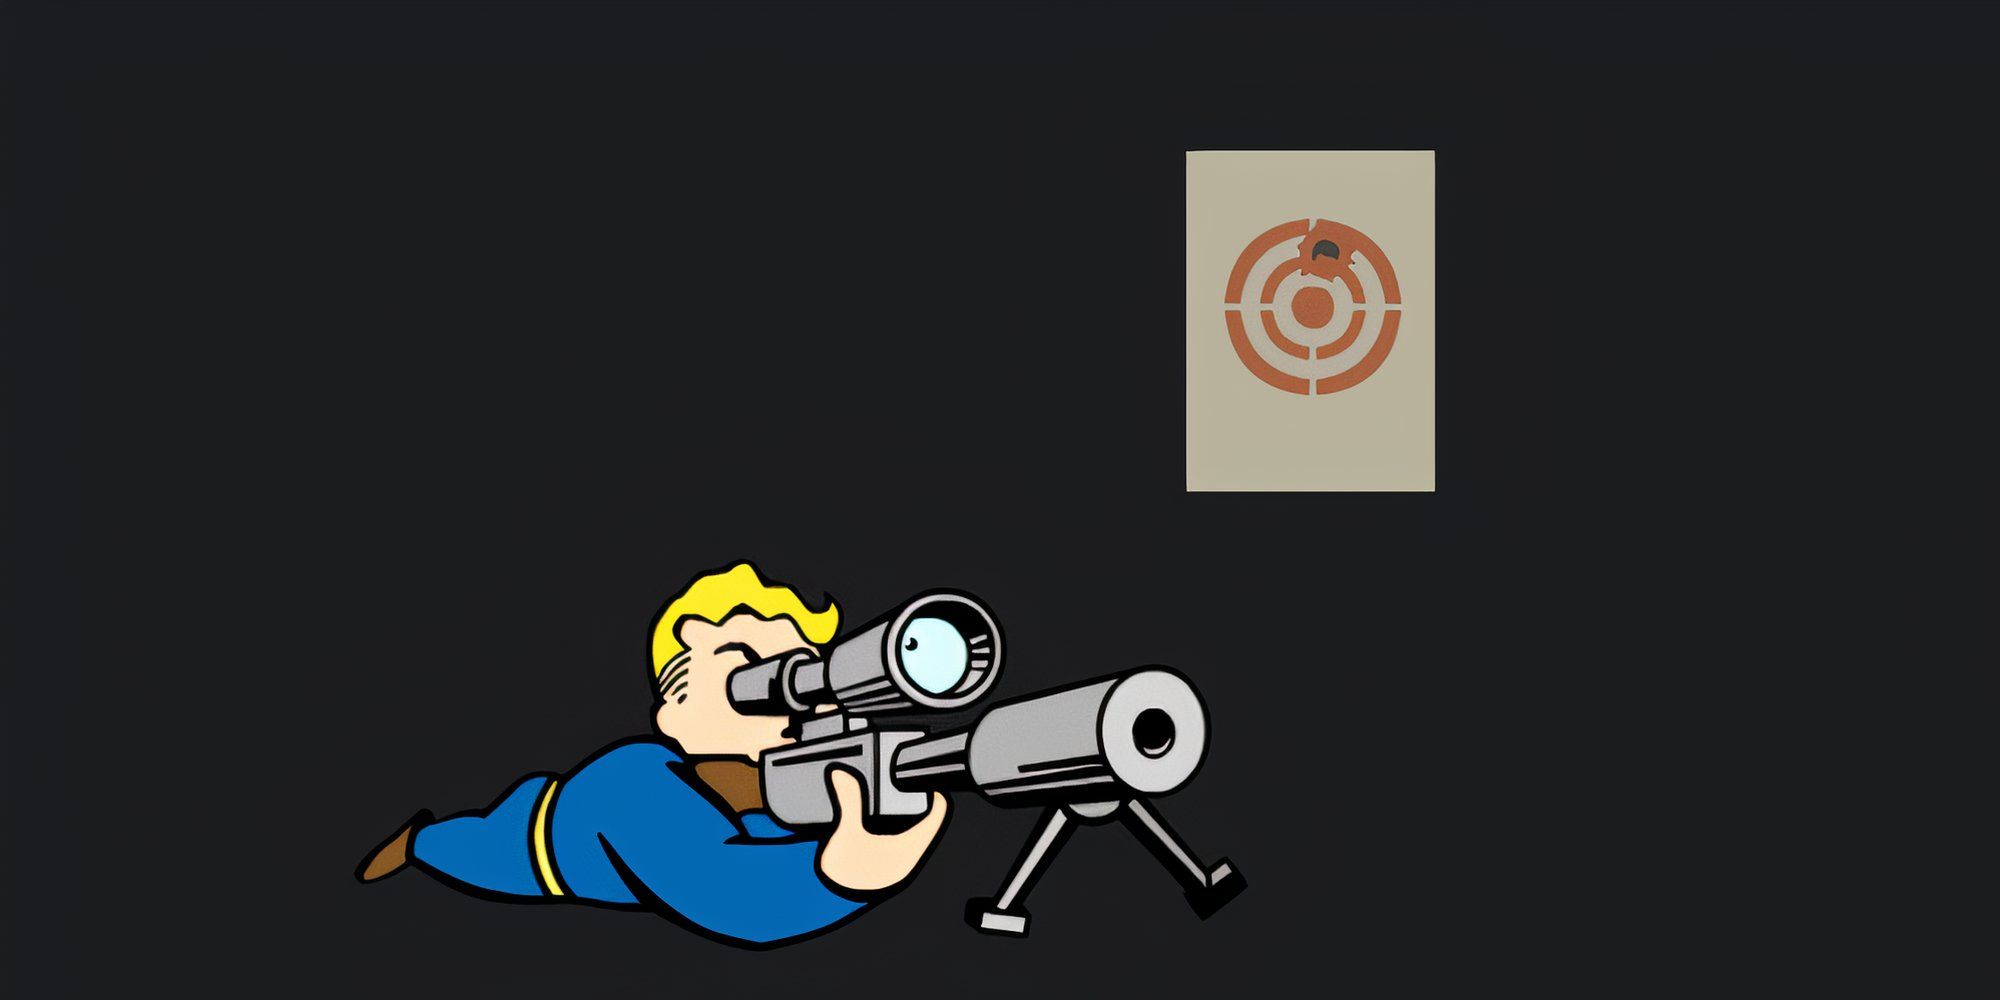 Vault Boy looks through the scope of a sniper rifle